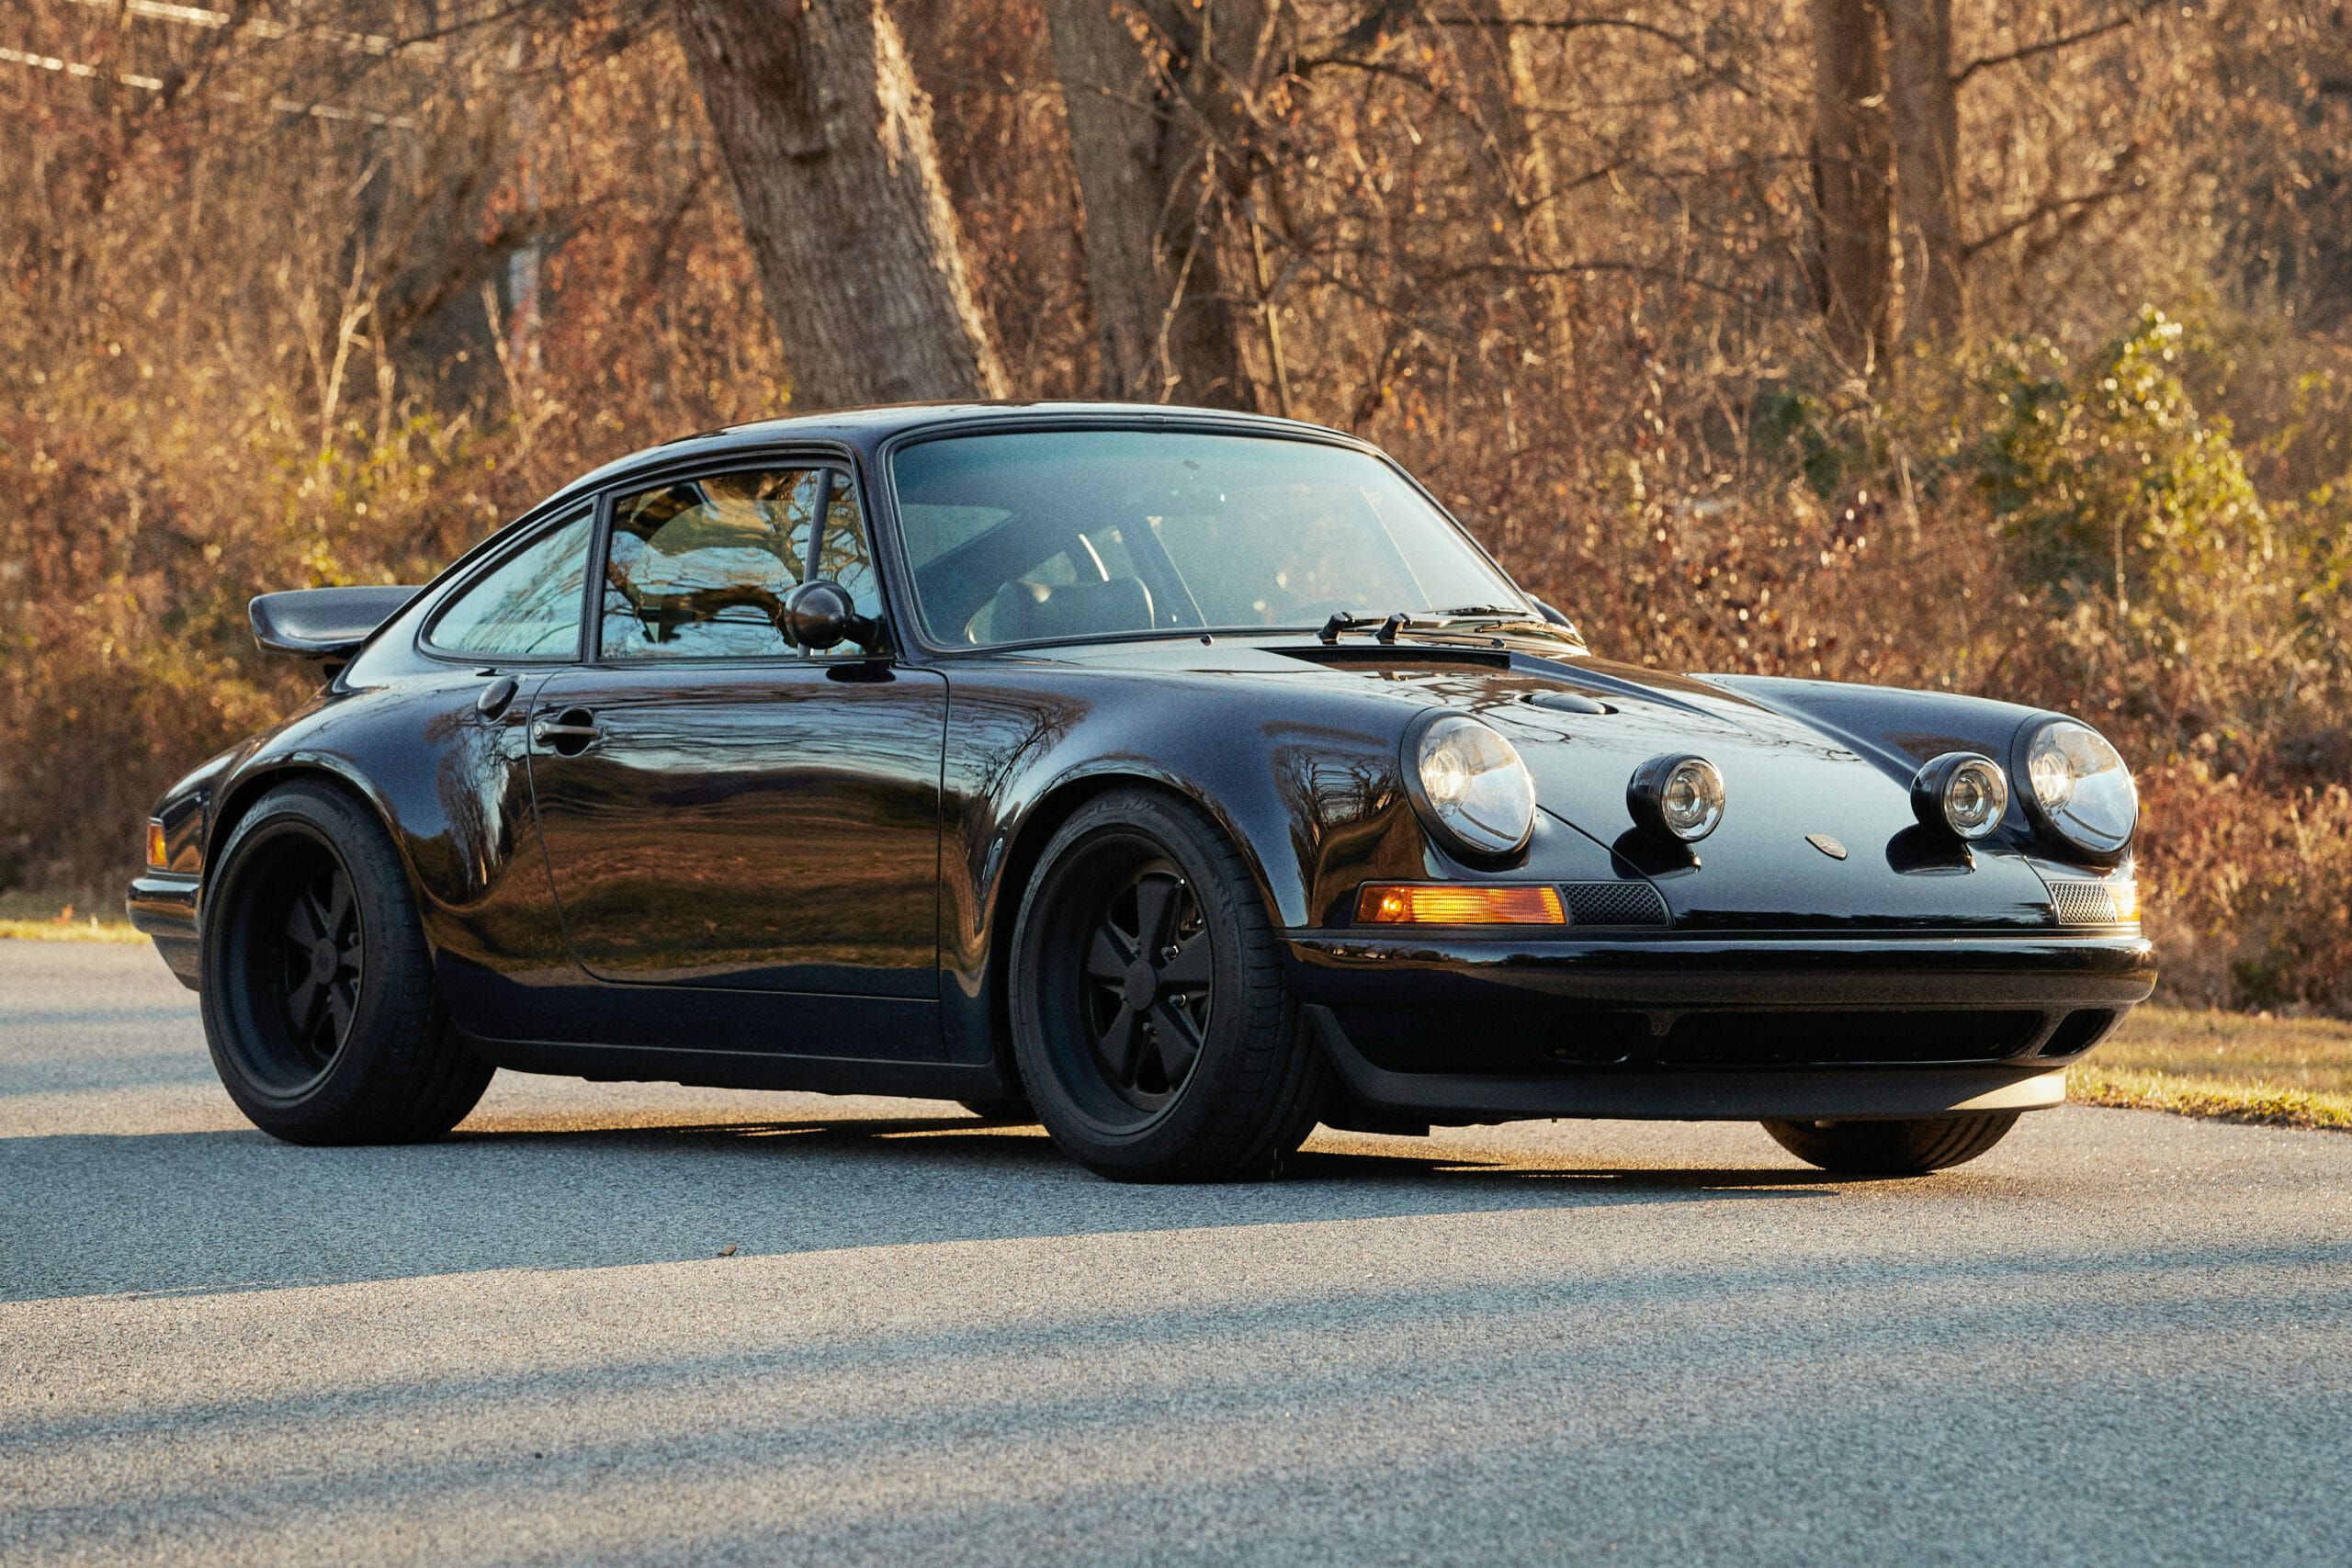 Want a Custom Vintage Porsche? Here Are the Companies to Know